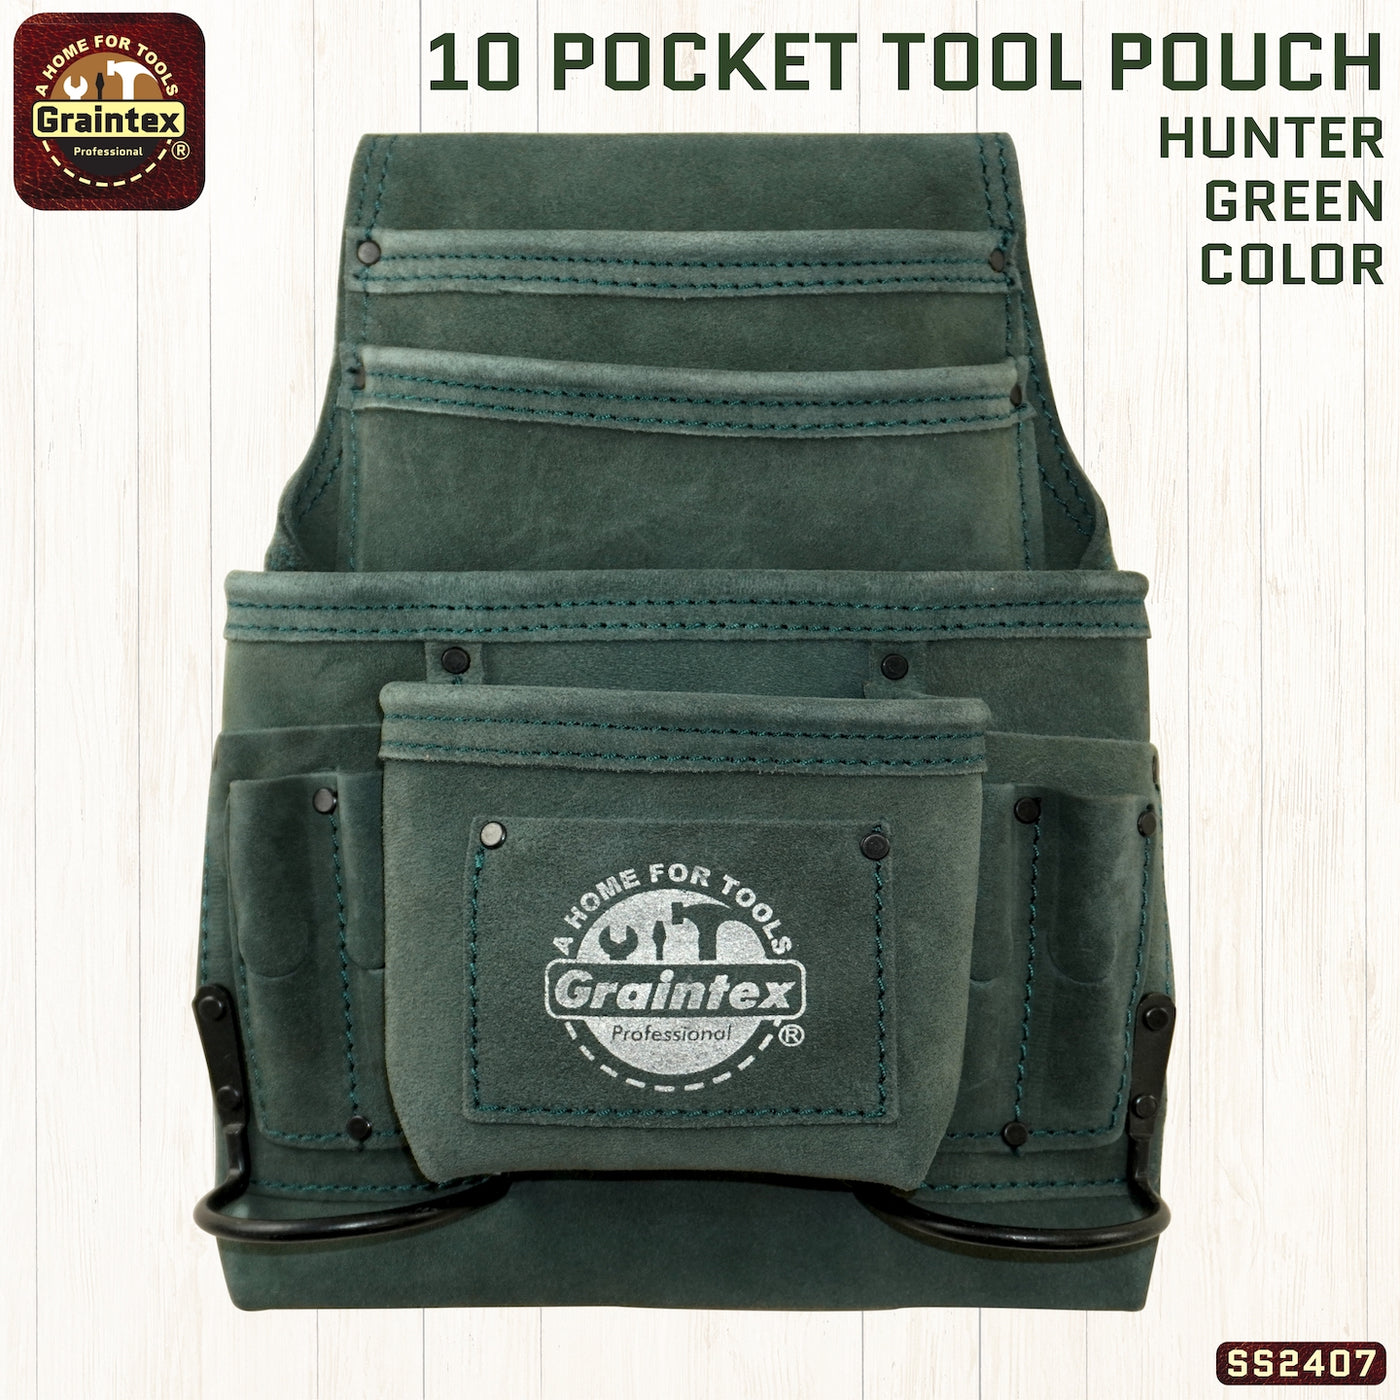 SS2407 :: 10 Pocket Nail & Tool Pouch Hunter Green Color Suede Leather